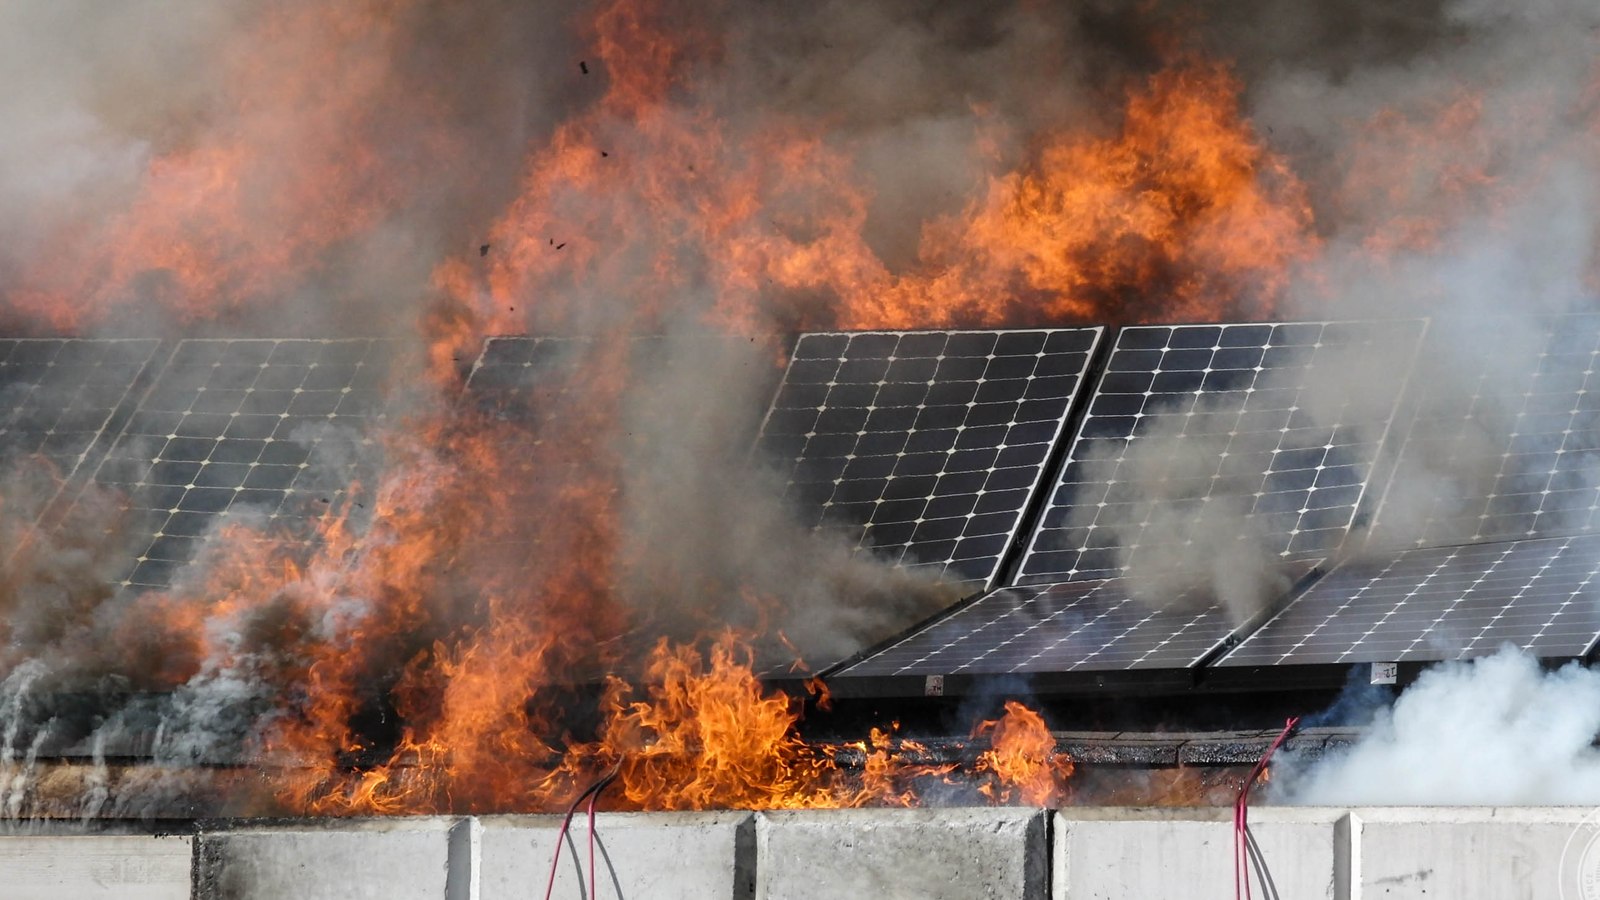 article IJEAP : Summaries of Causes, Effects and Prevention of Solar Electric Fire Incidents